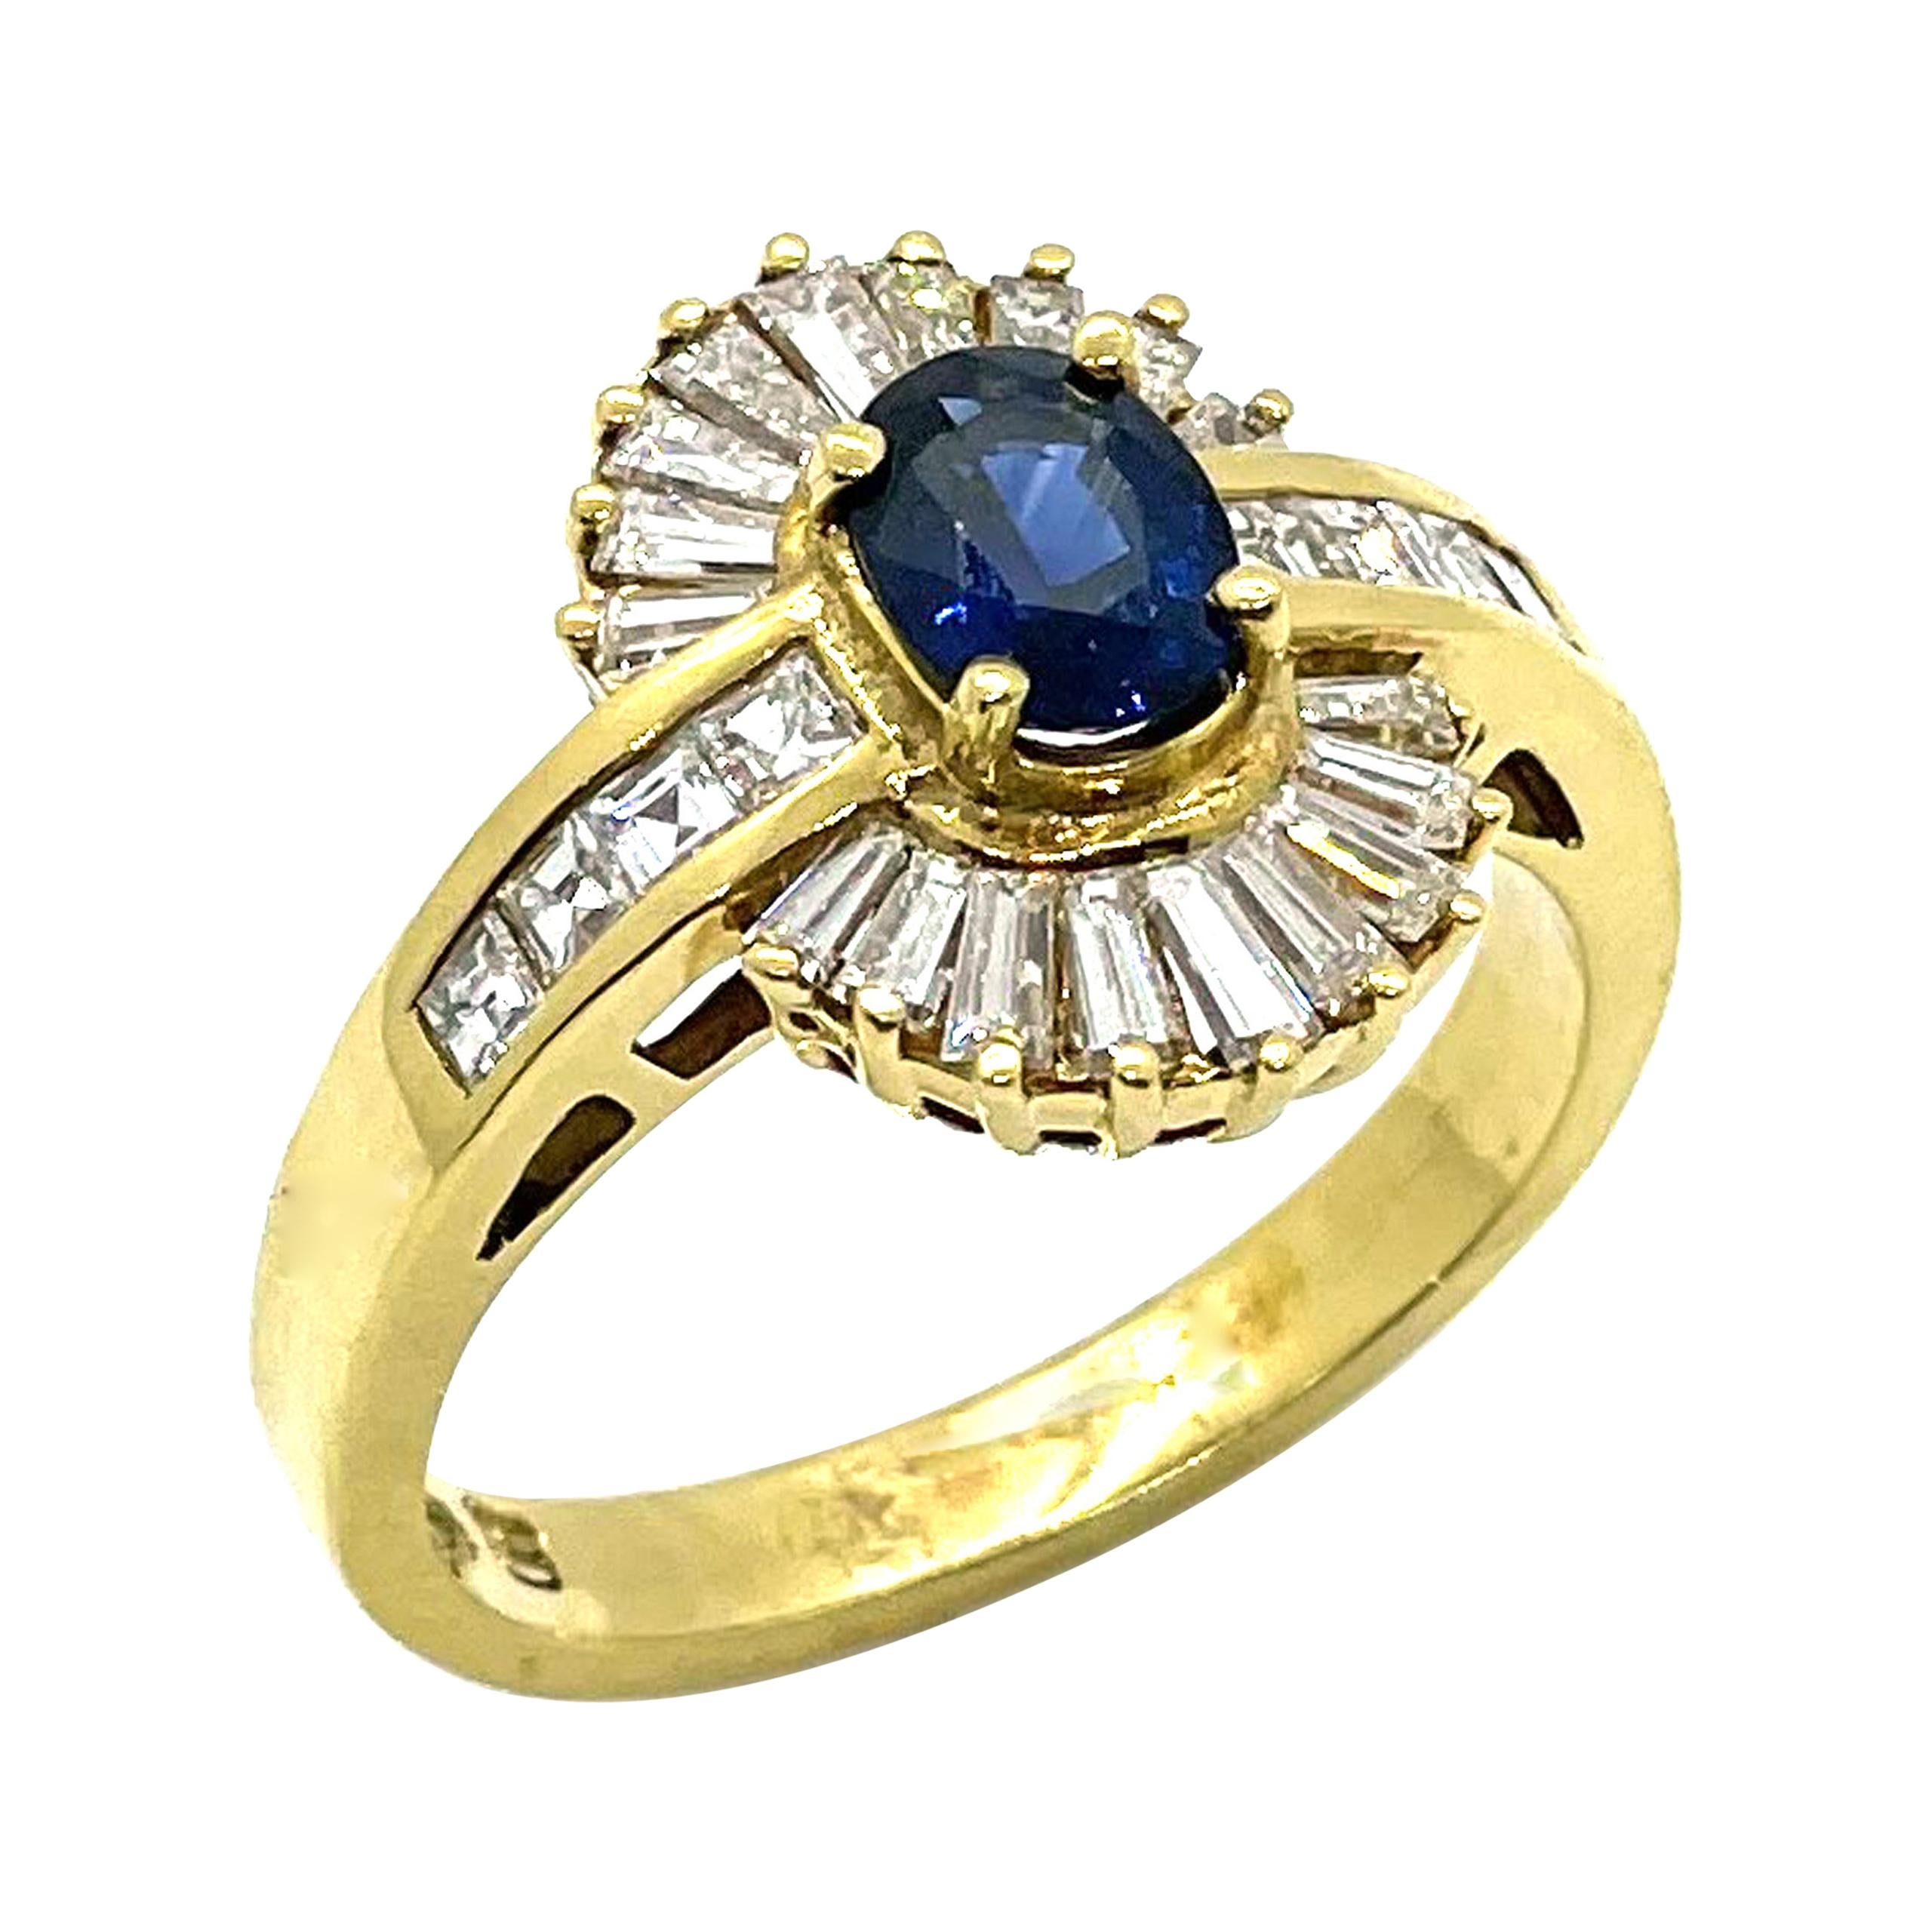 Vintage Sapphire Ring with Baguette Diamonds Set in 18k Gold, Circa 1985 For Sale